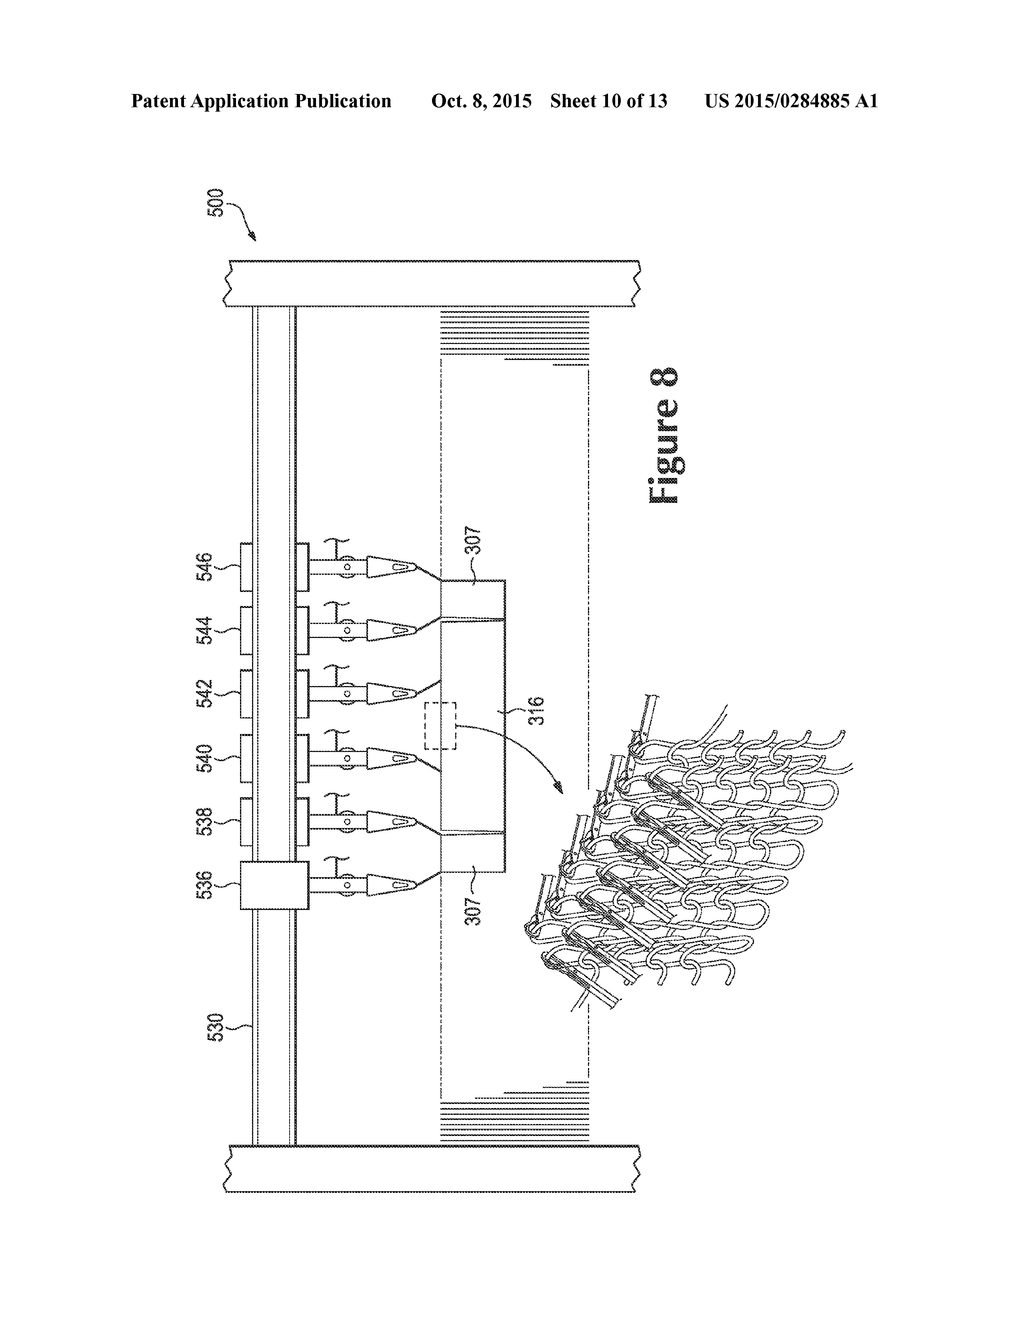 Method of Forming a Unitary Knit Article Using Flat-Knit Construction - diagram, schematic, and image 11